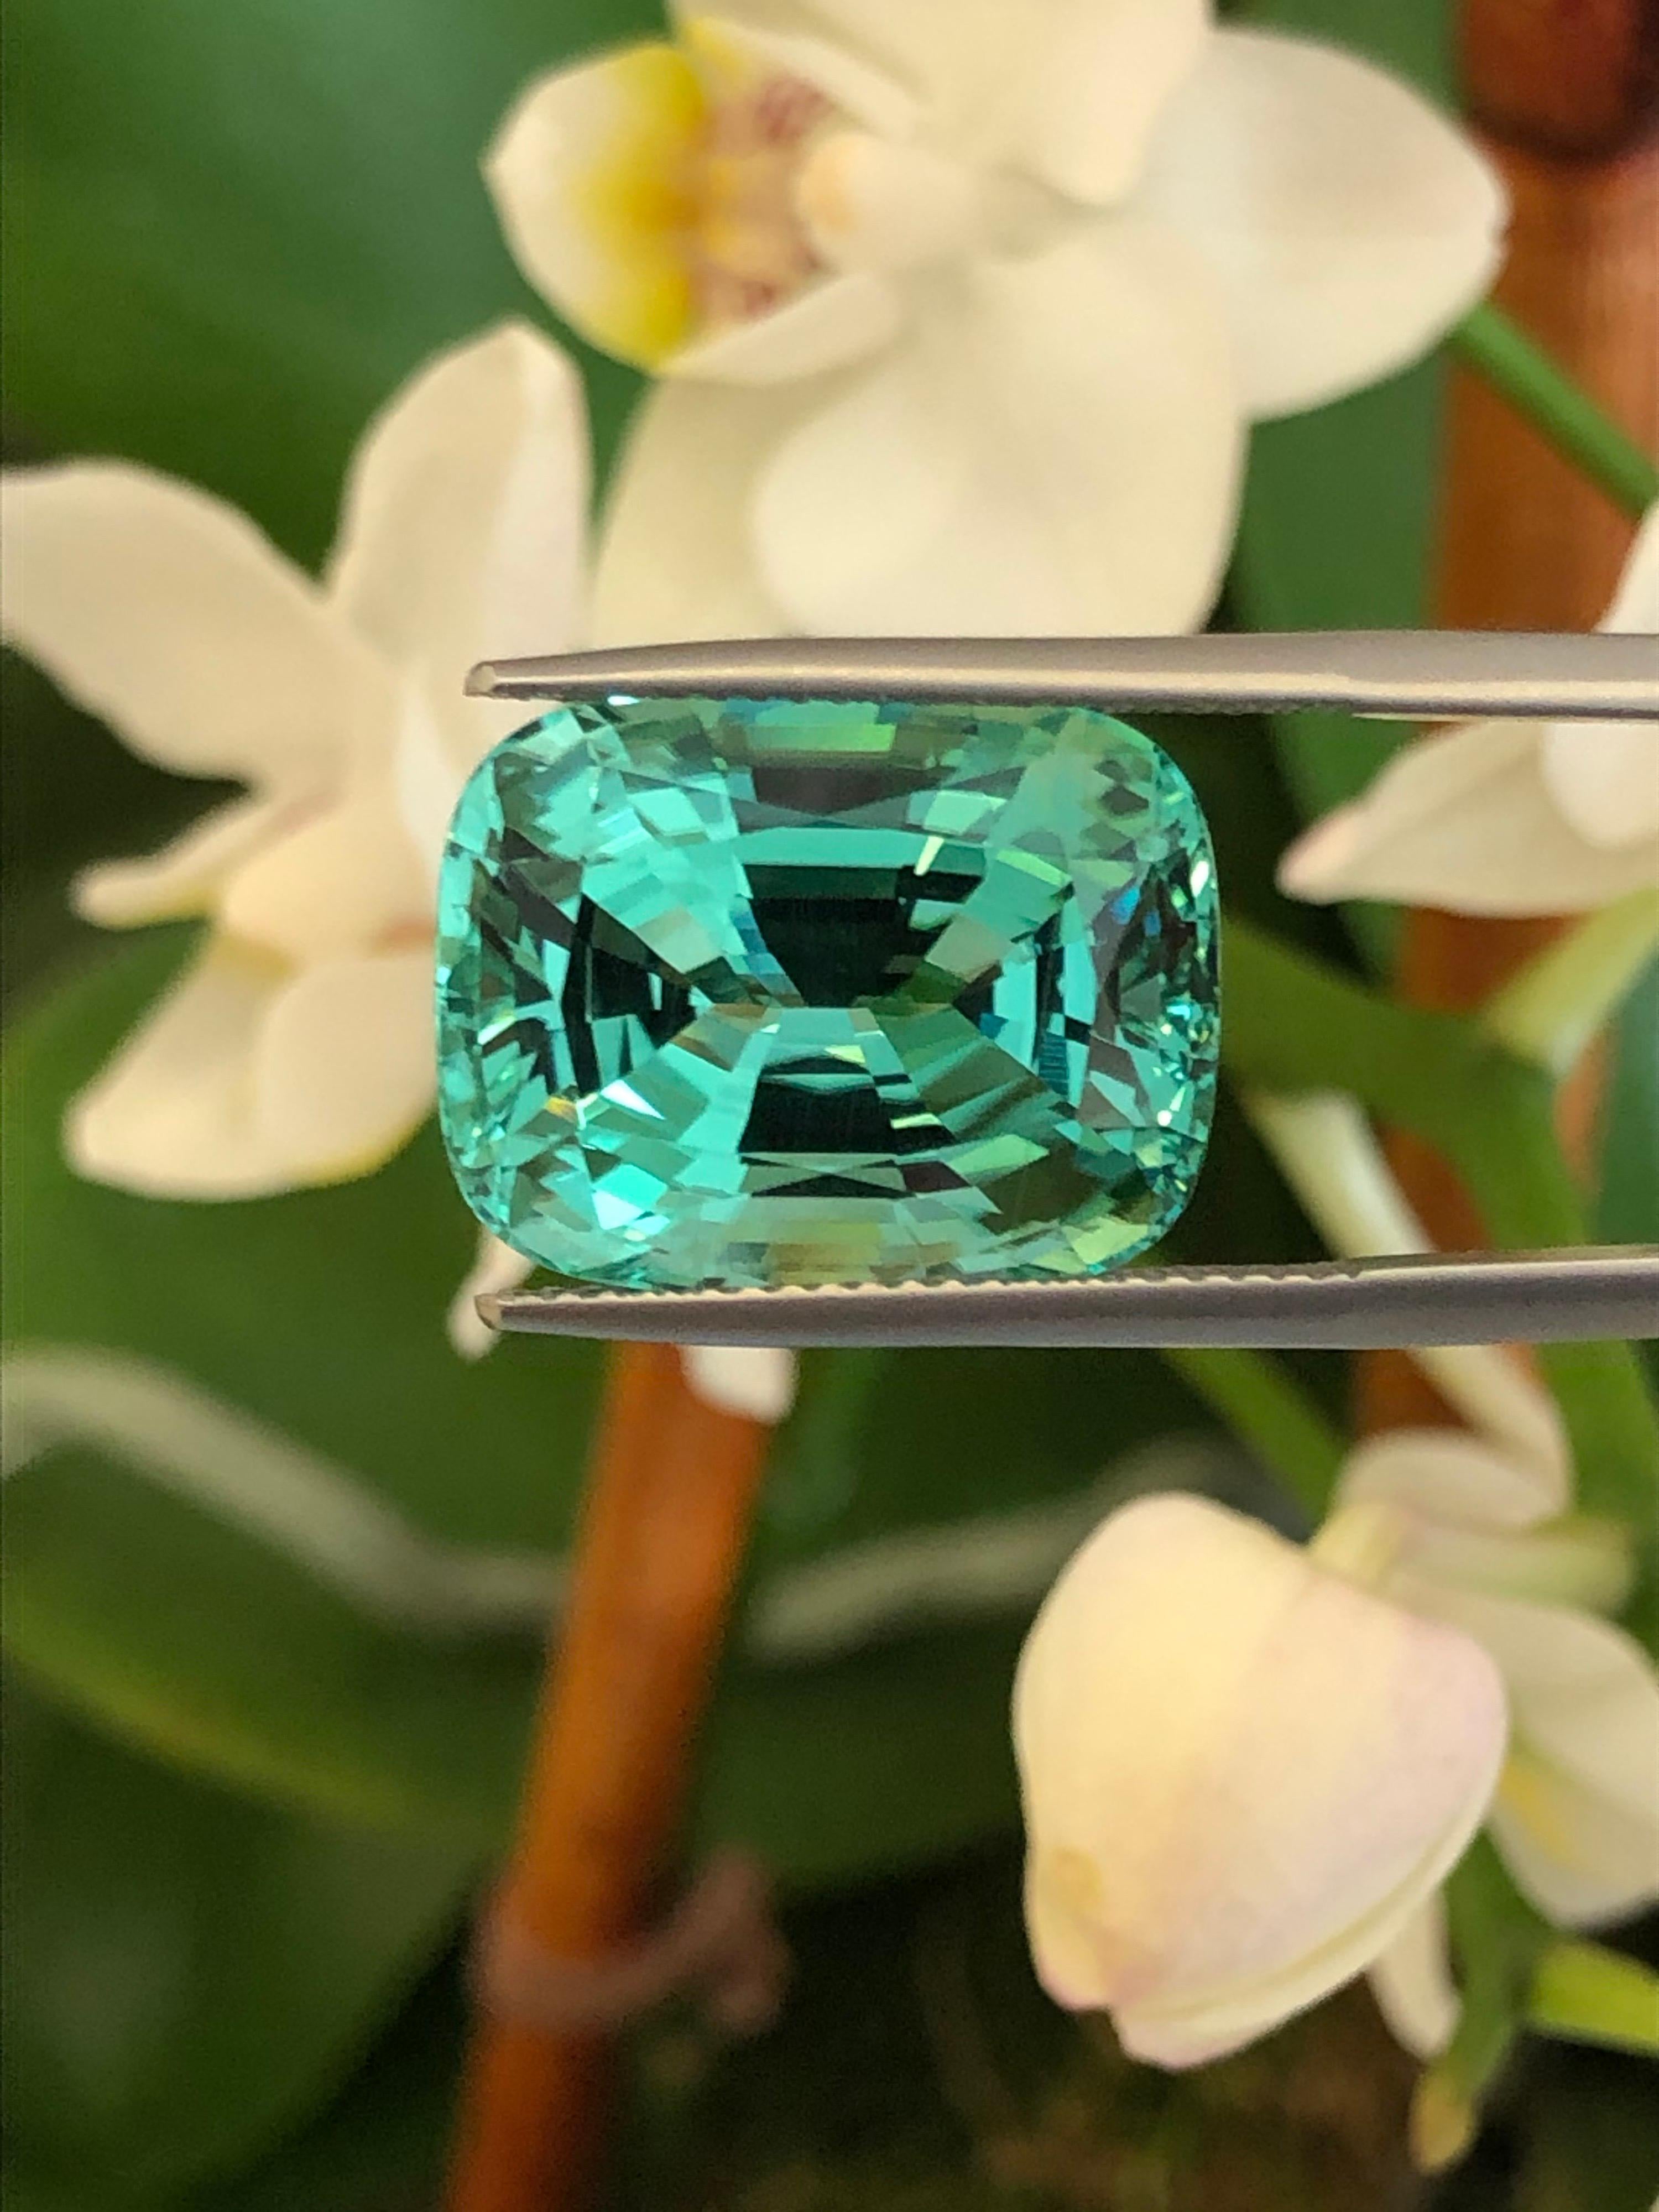 Legendary unheated Paraiba Tourmaline cushion cut gem, weighing a total 17.14 carats, offered loose to a world-class gemstone collector.
Paraiba Tourmaline has established itself as one of the most sought after gems in the world, enticing global gem